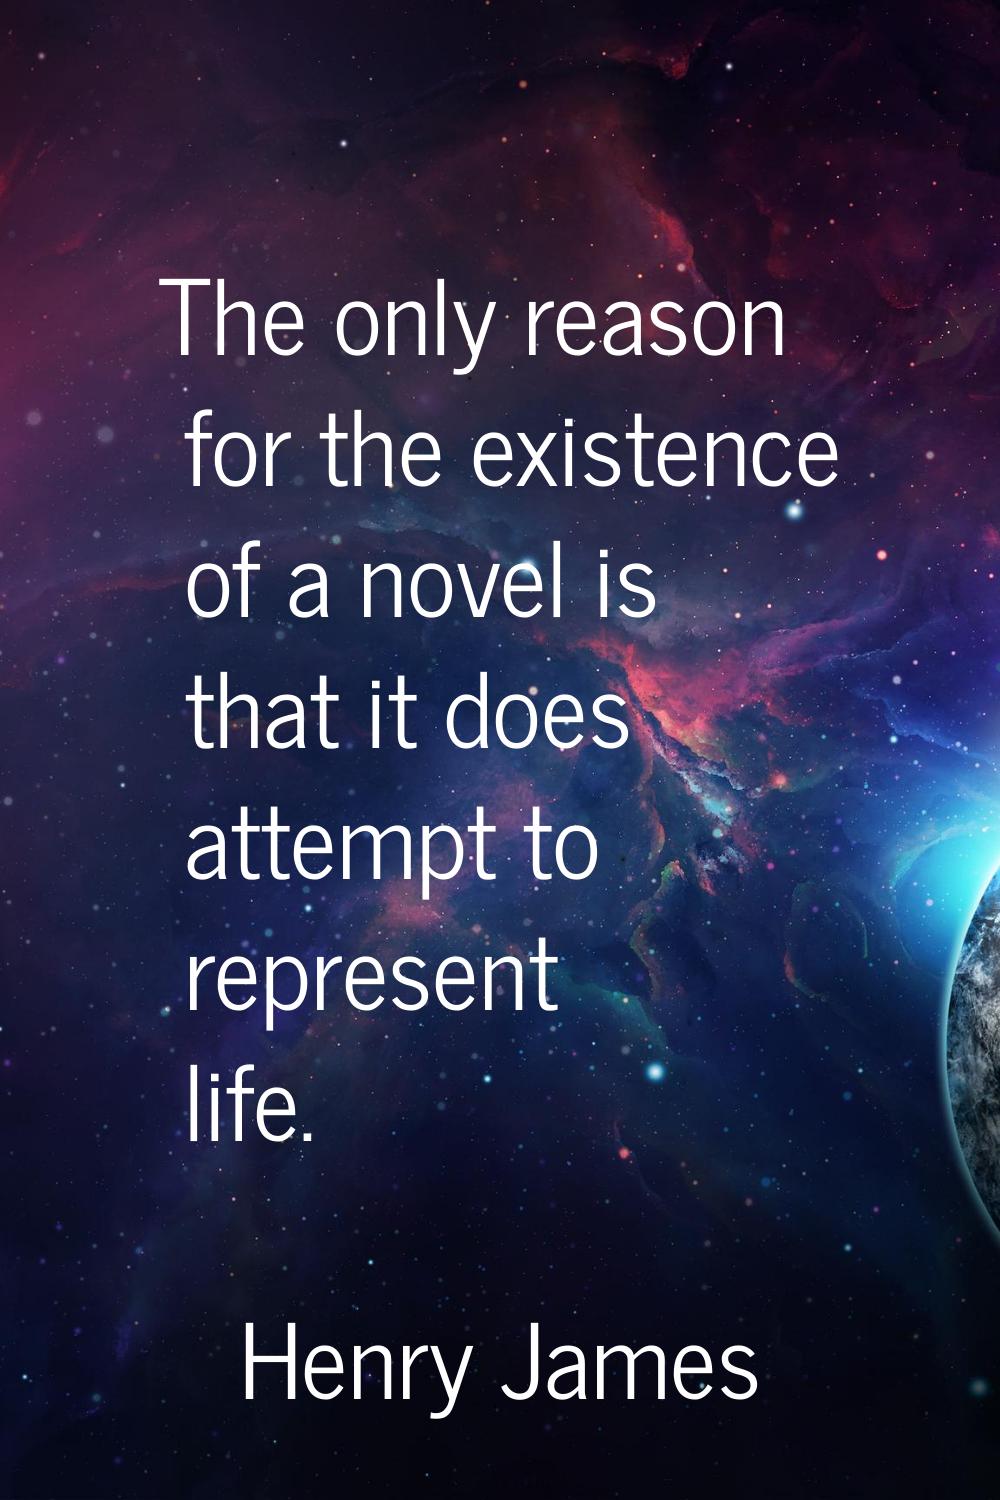 The only reason for the existence of a novel is that it does attempt to represent life.